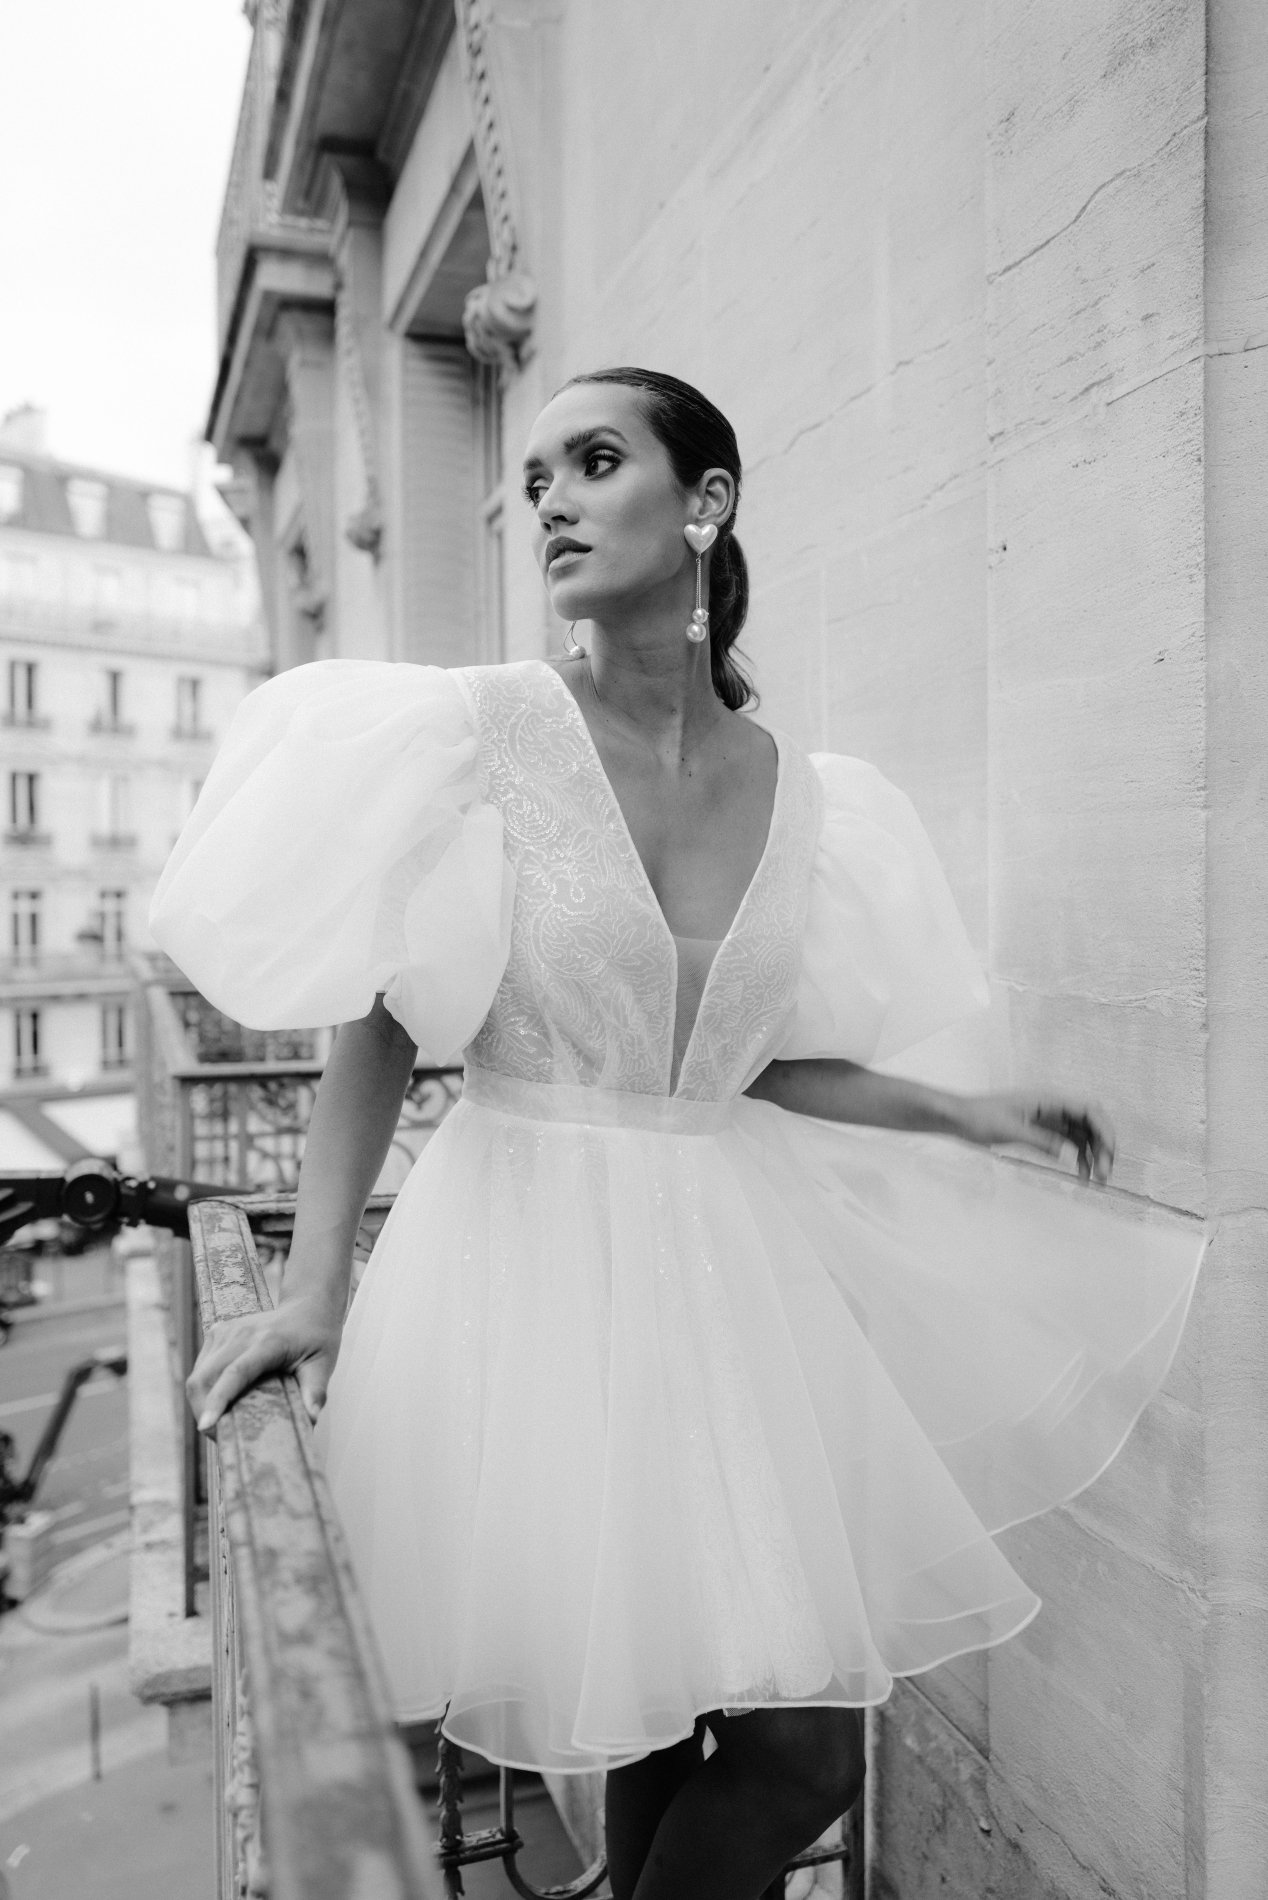 In this article, we'll take a closer look at Maison Rime Arodaky wedding dresses to help you choose the perfect dress for your special day.